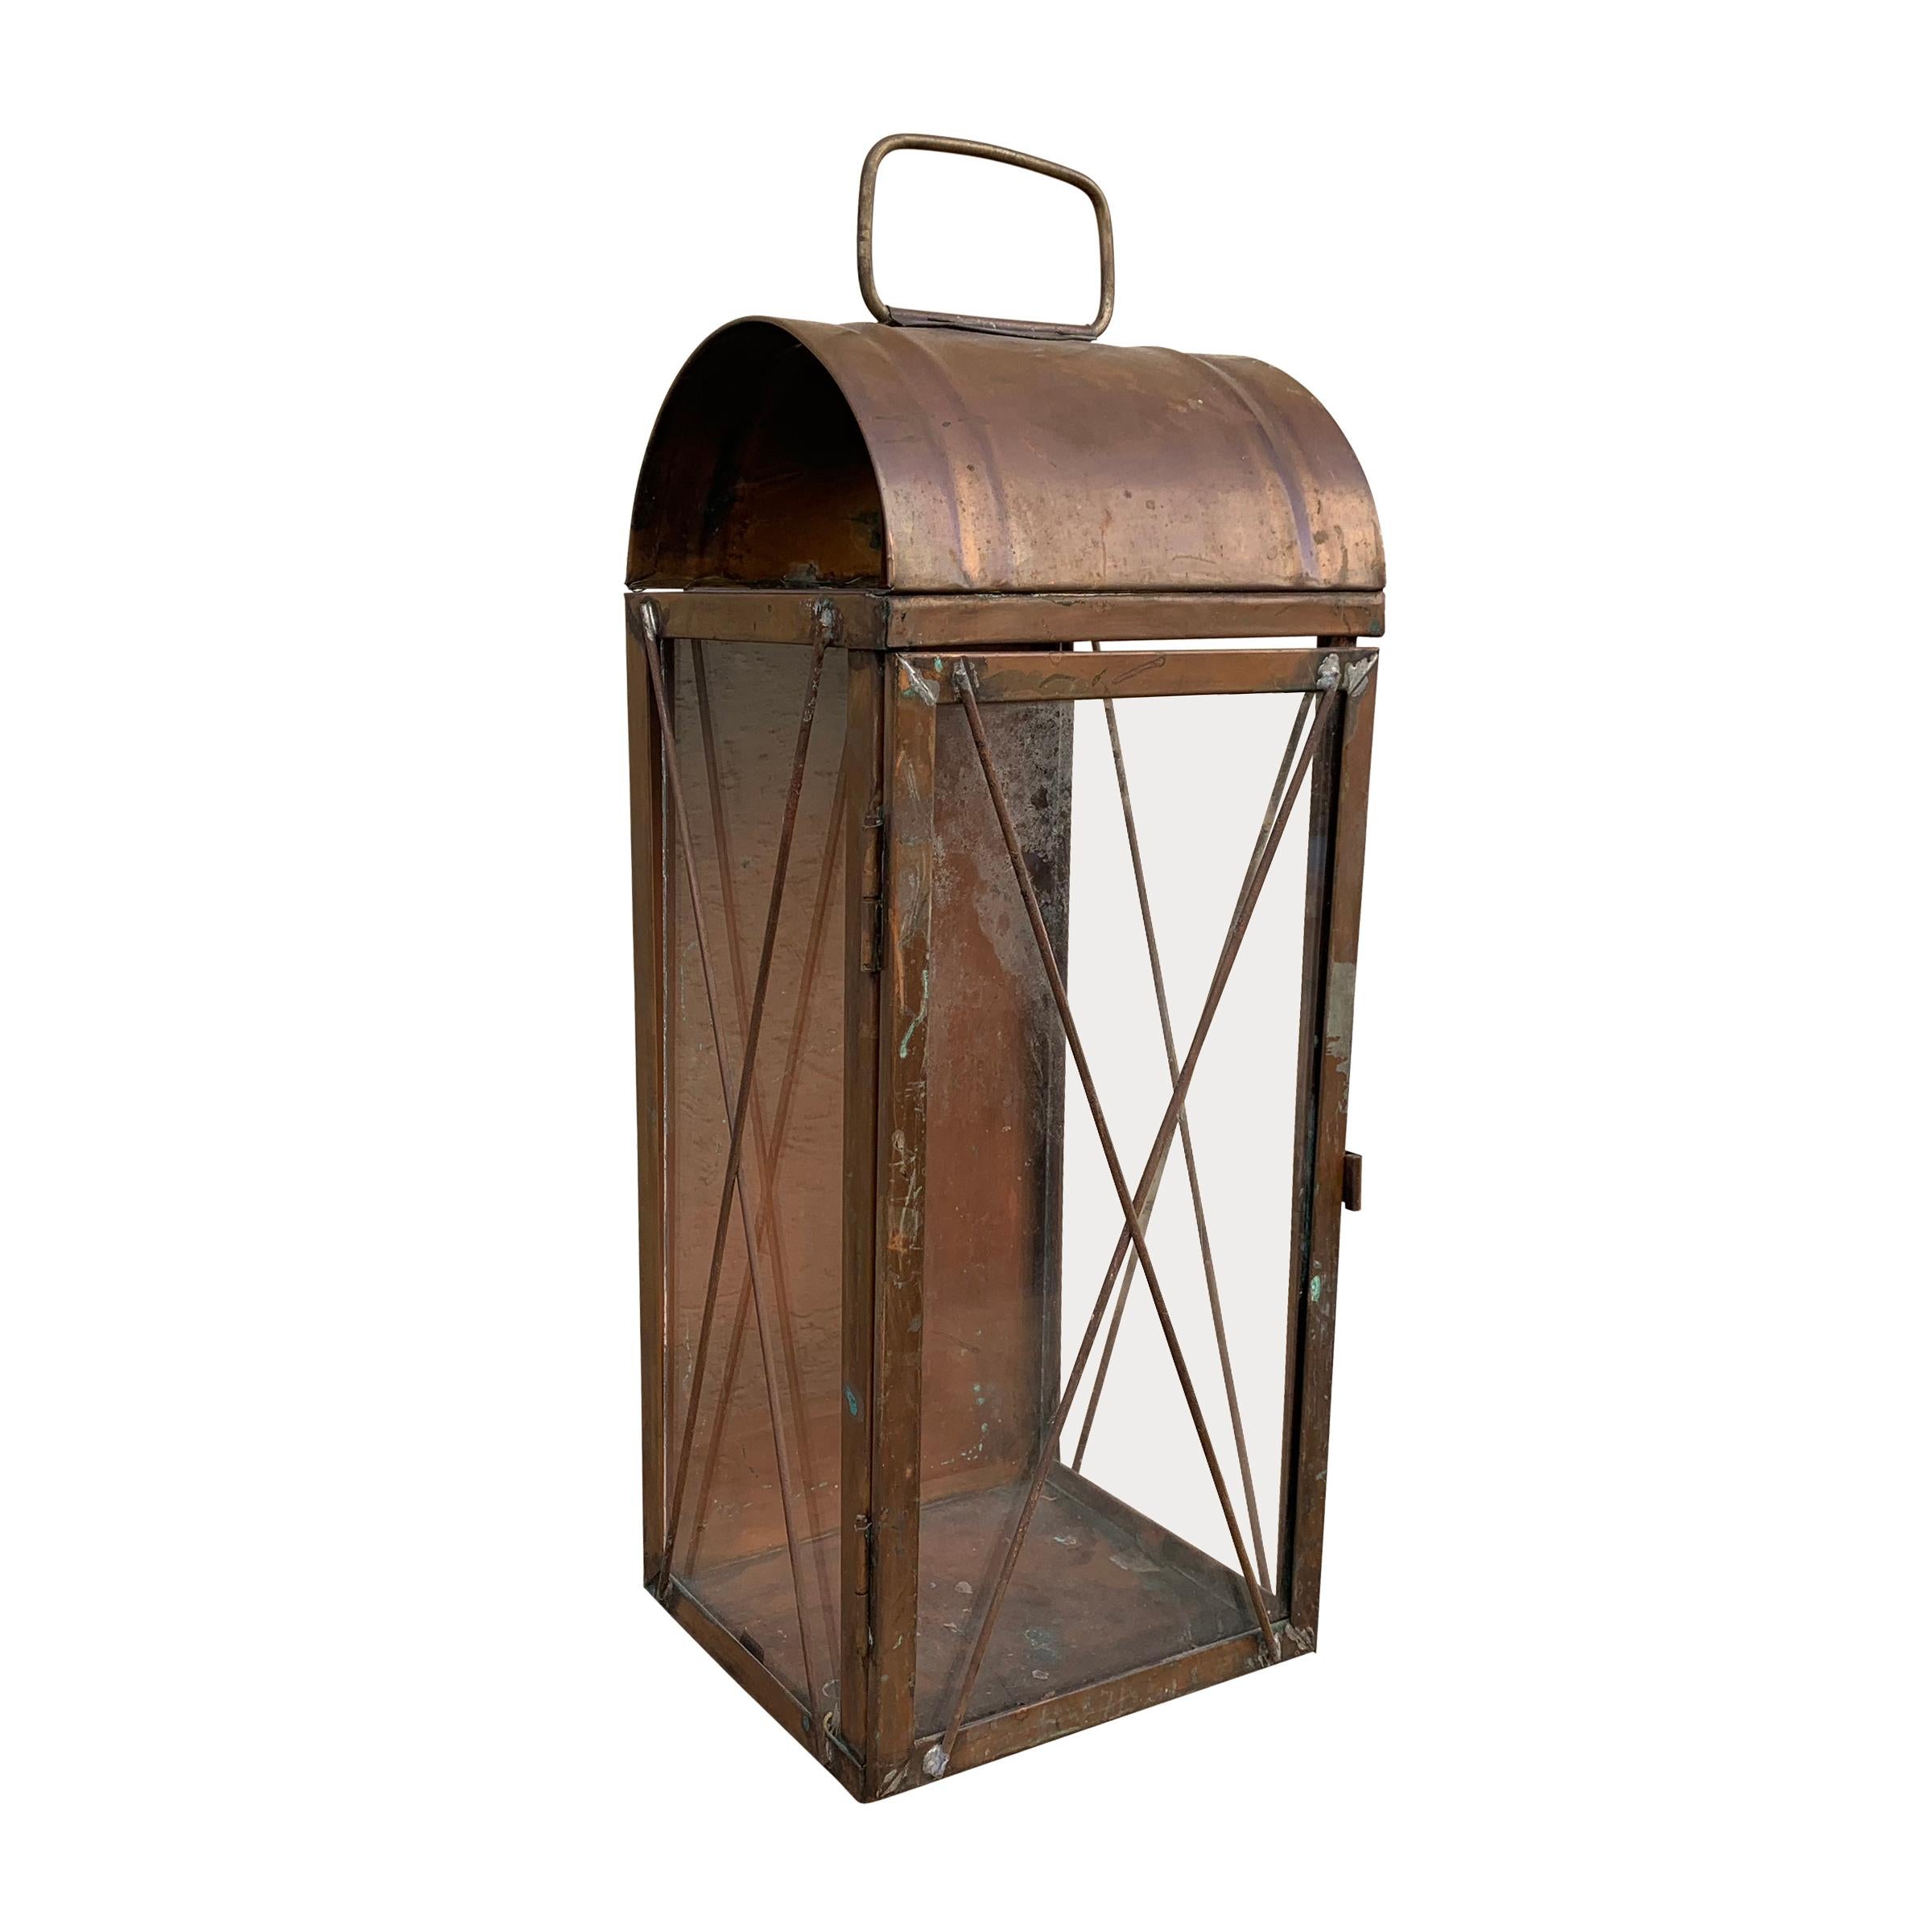 Pair of American copper candle lanterns with a three glass sides, a door on the front, and a vent at the top to allow the heat to escape.